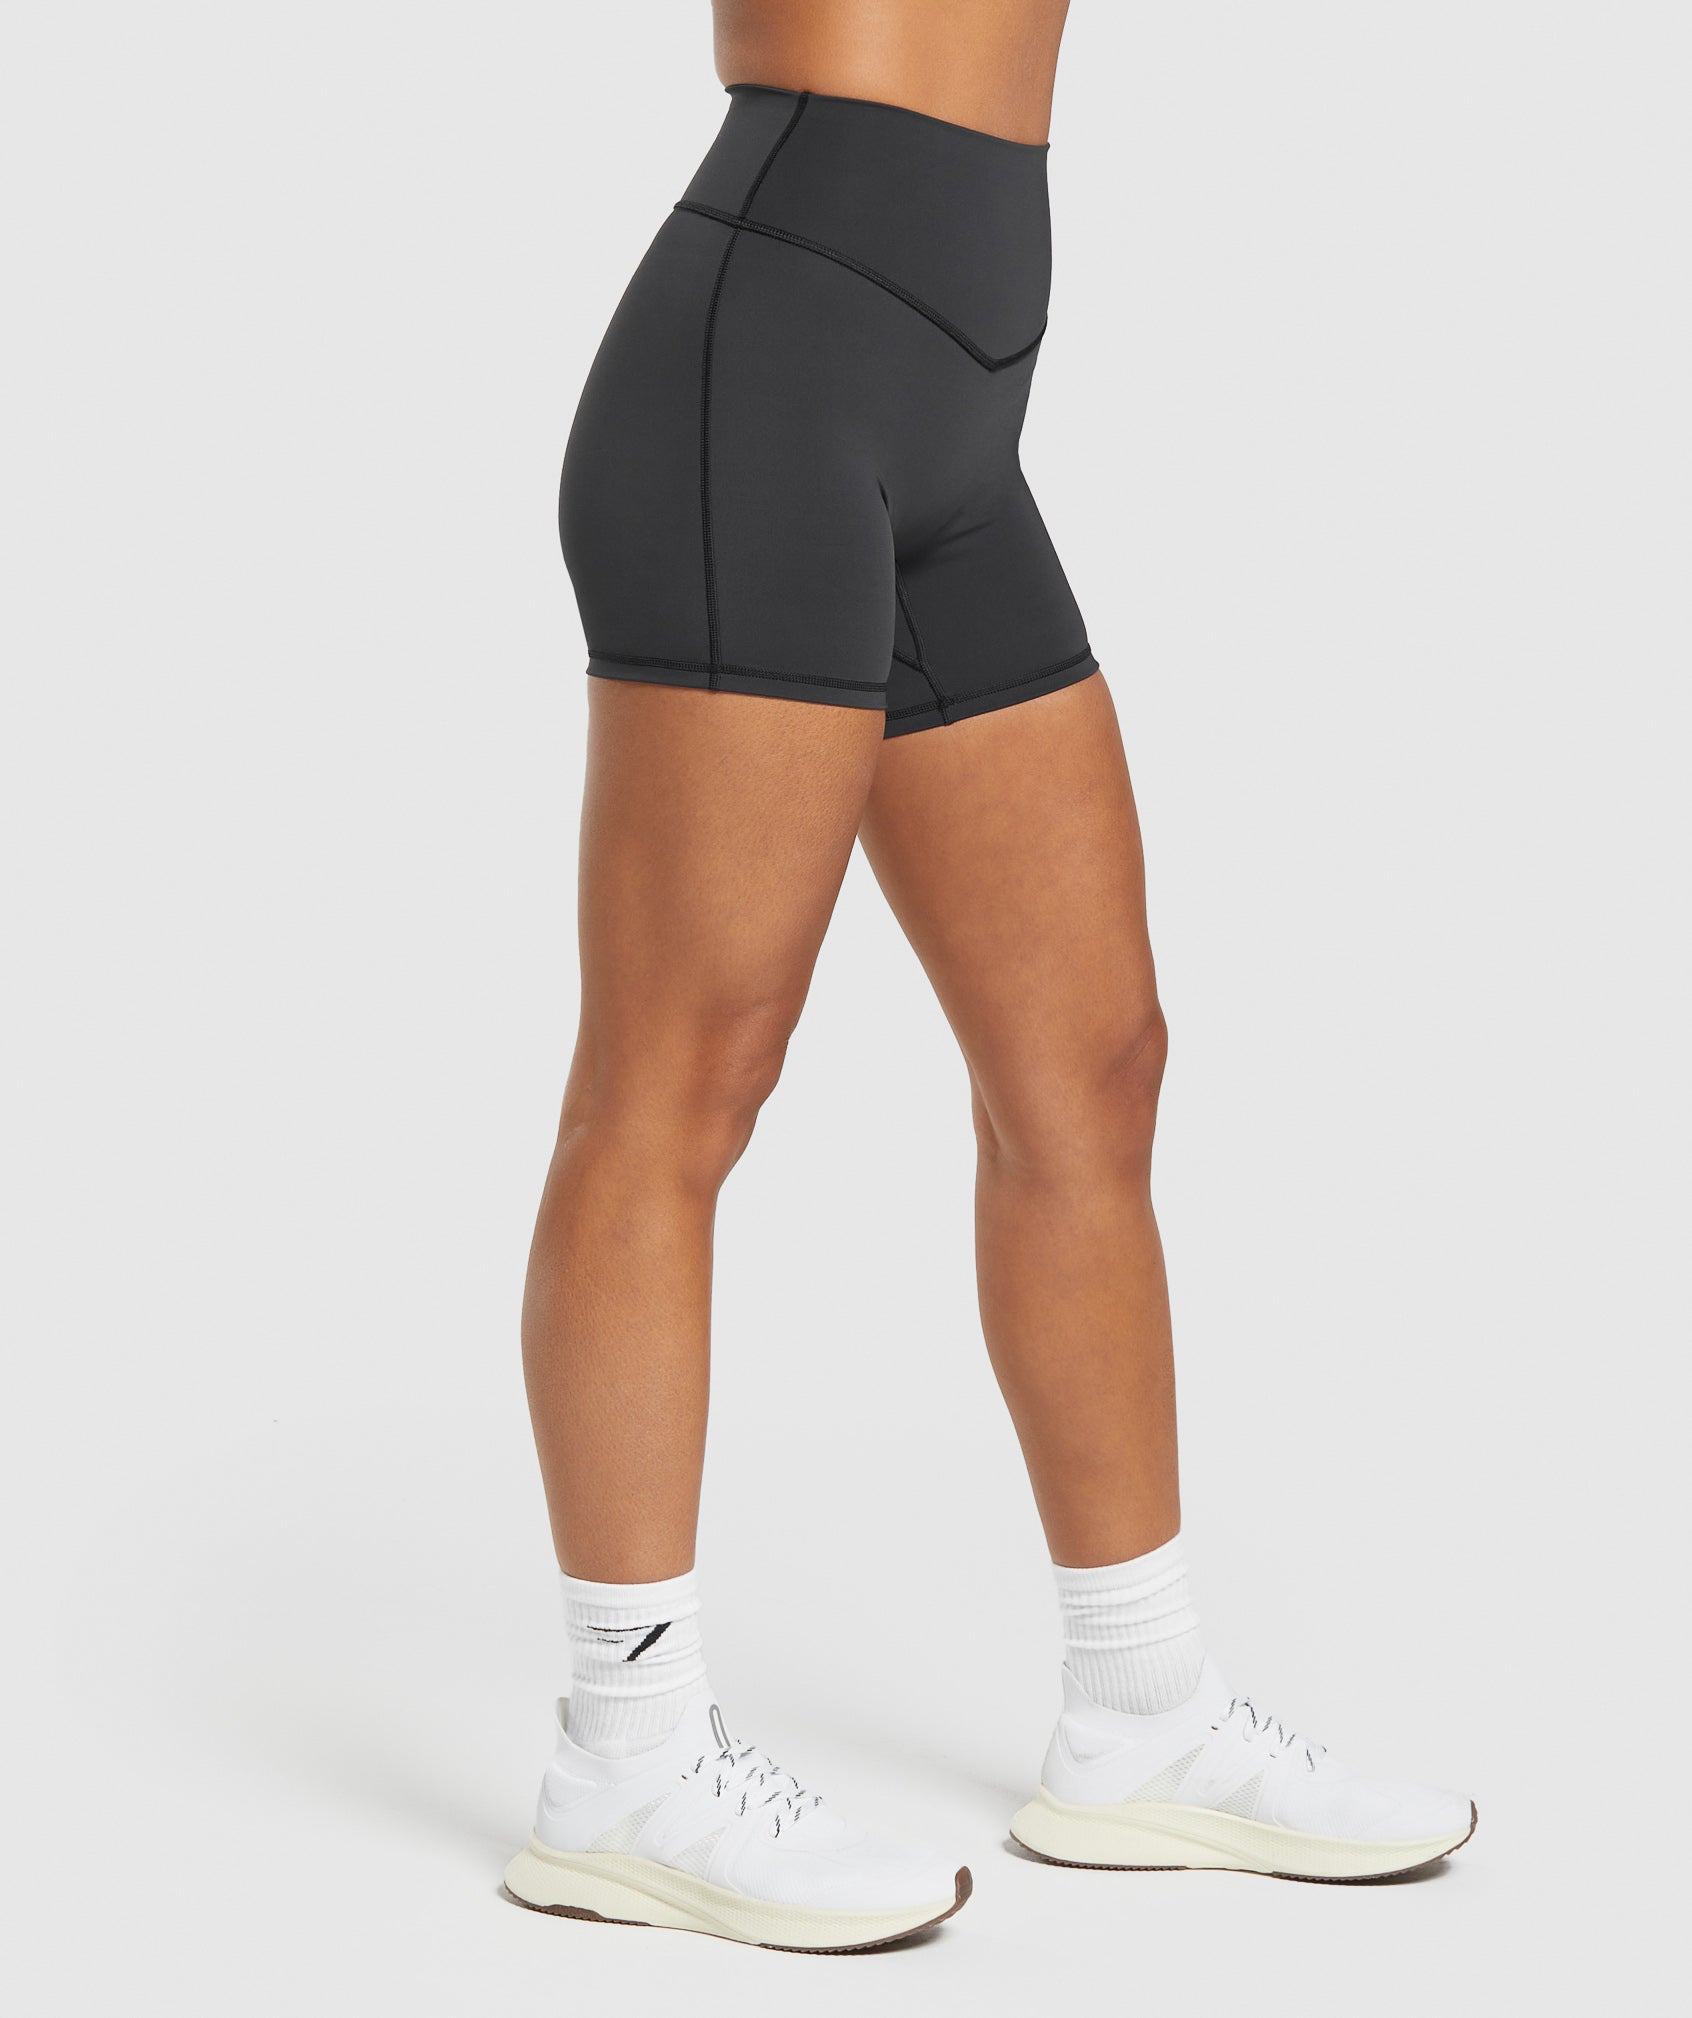 Elevate Shorts in Black - view 3